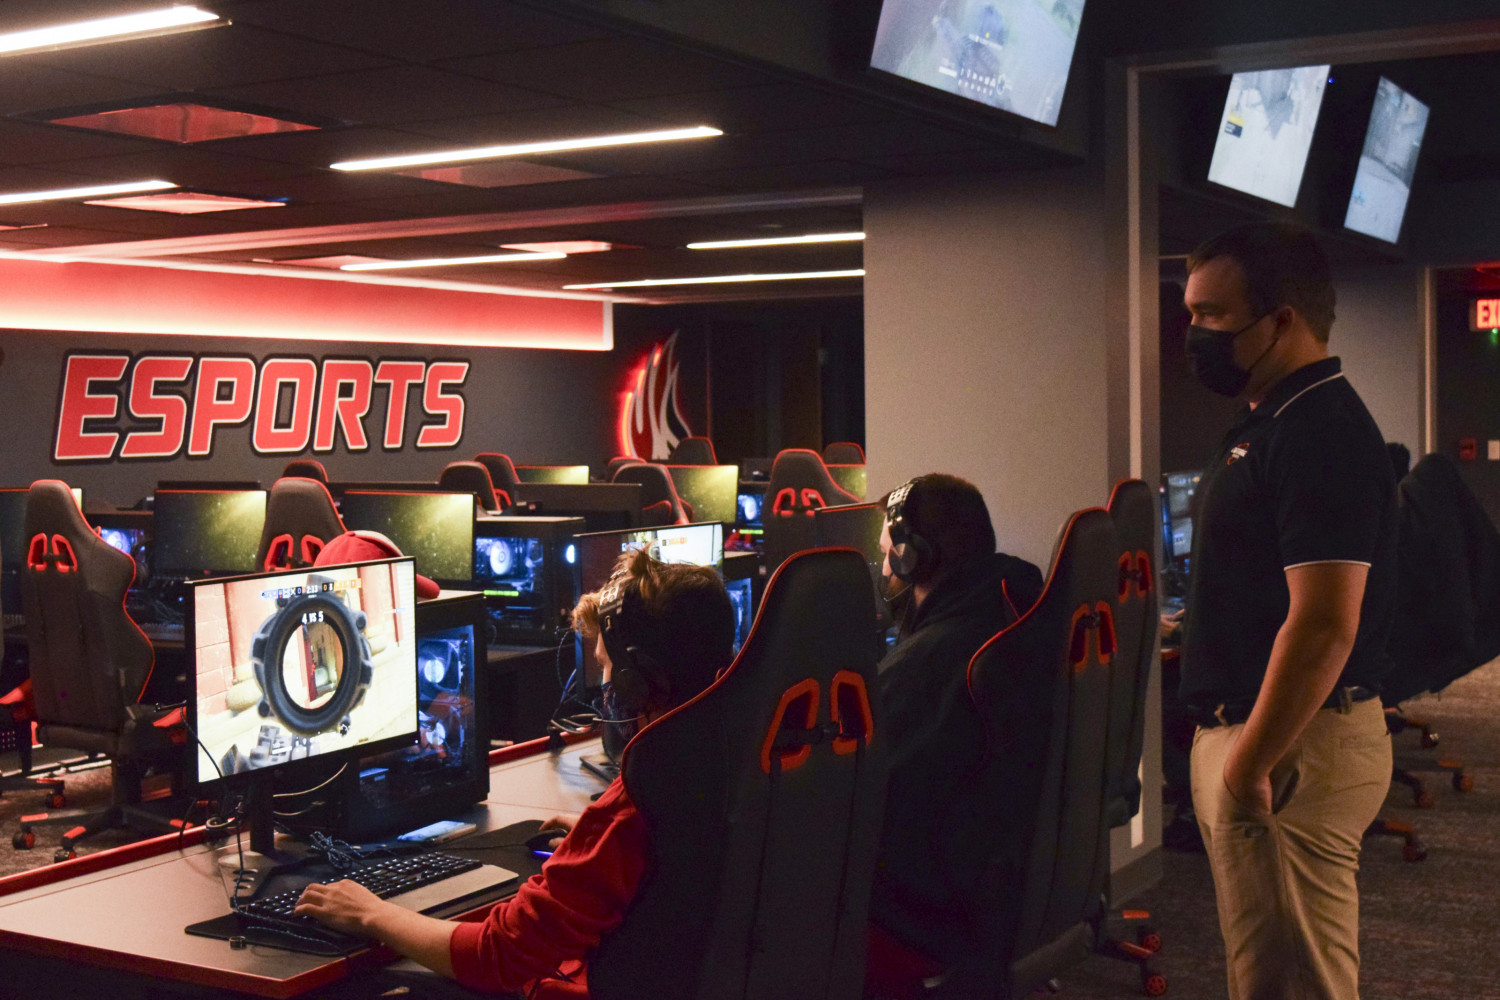 Maybe esports are more your style. Carthage has a new coed varsity team.